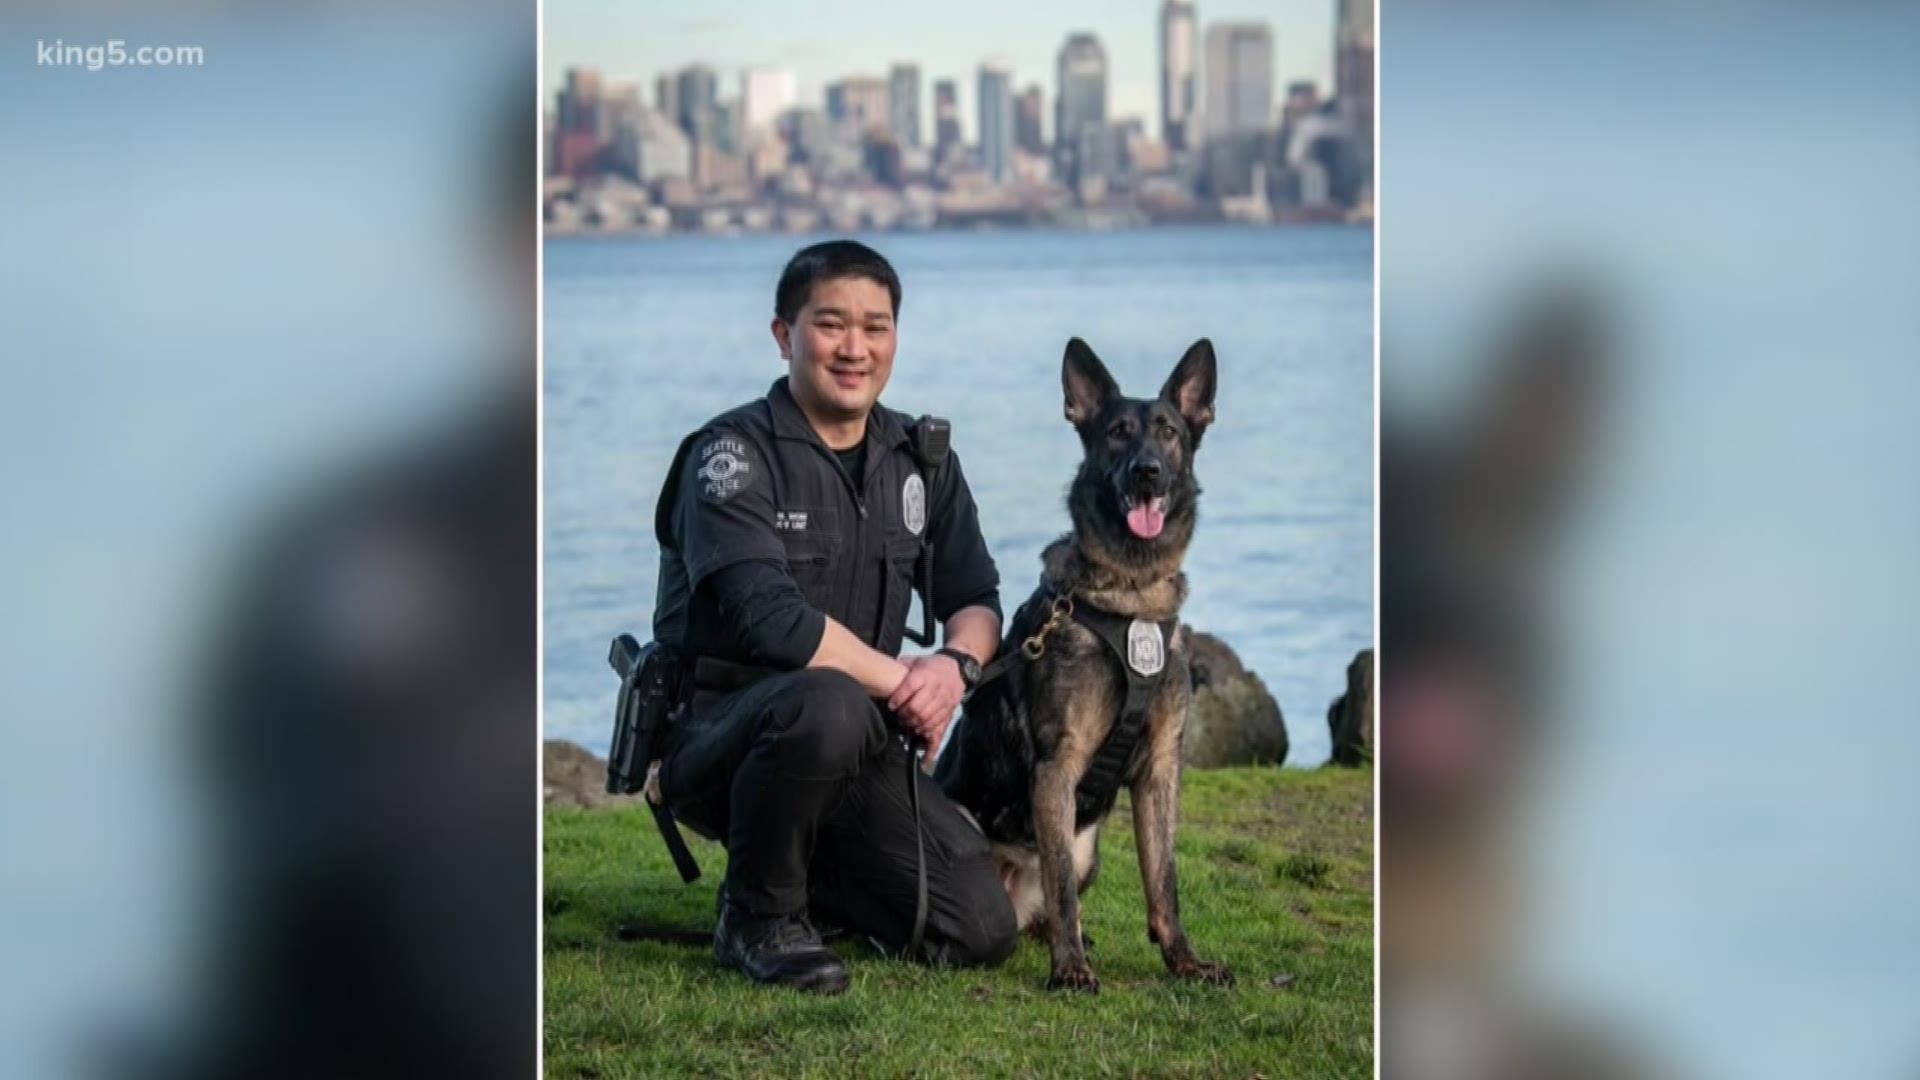 Seattle police K9 Katniss and her partner Officer Wong caught a suspect allegedly stealing packages in the Queen Anne neighborhood.